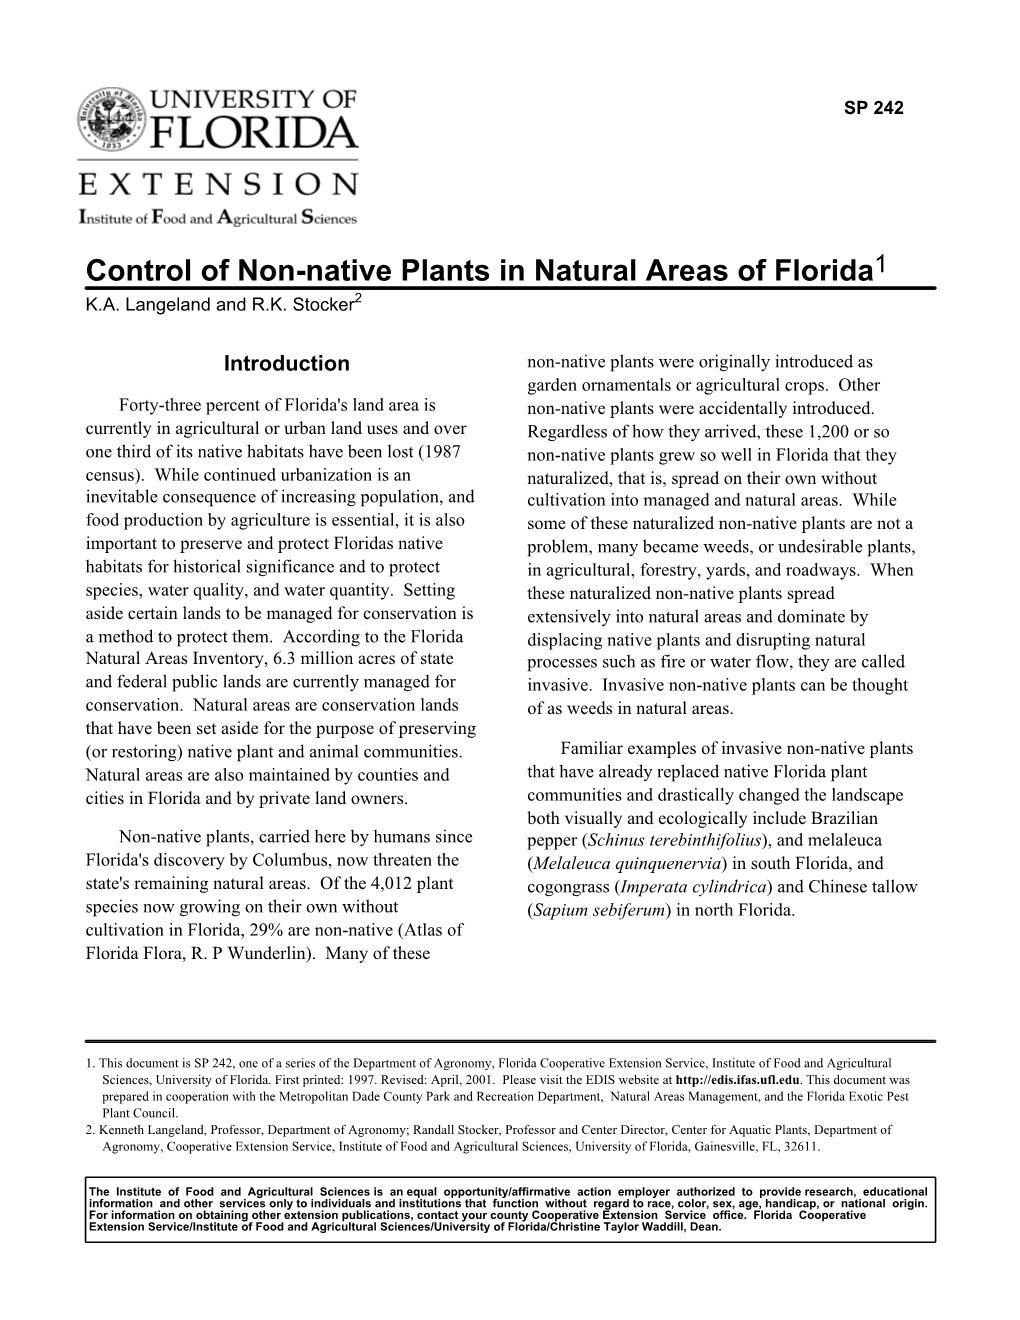 Control of Non-Native Plants in Natural Areas of Florida1 K.A